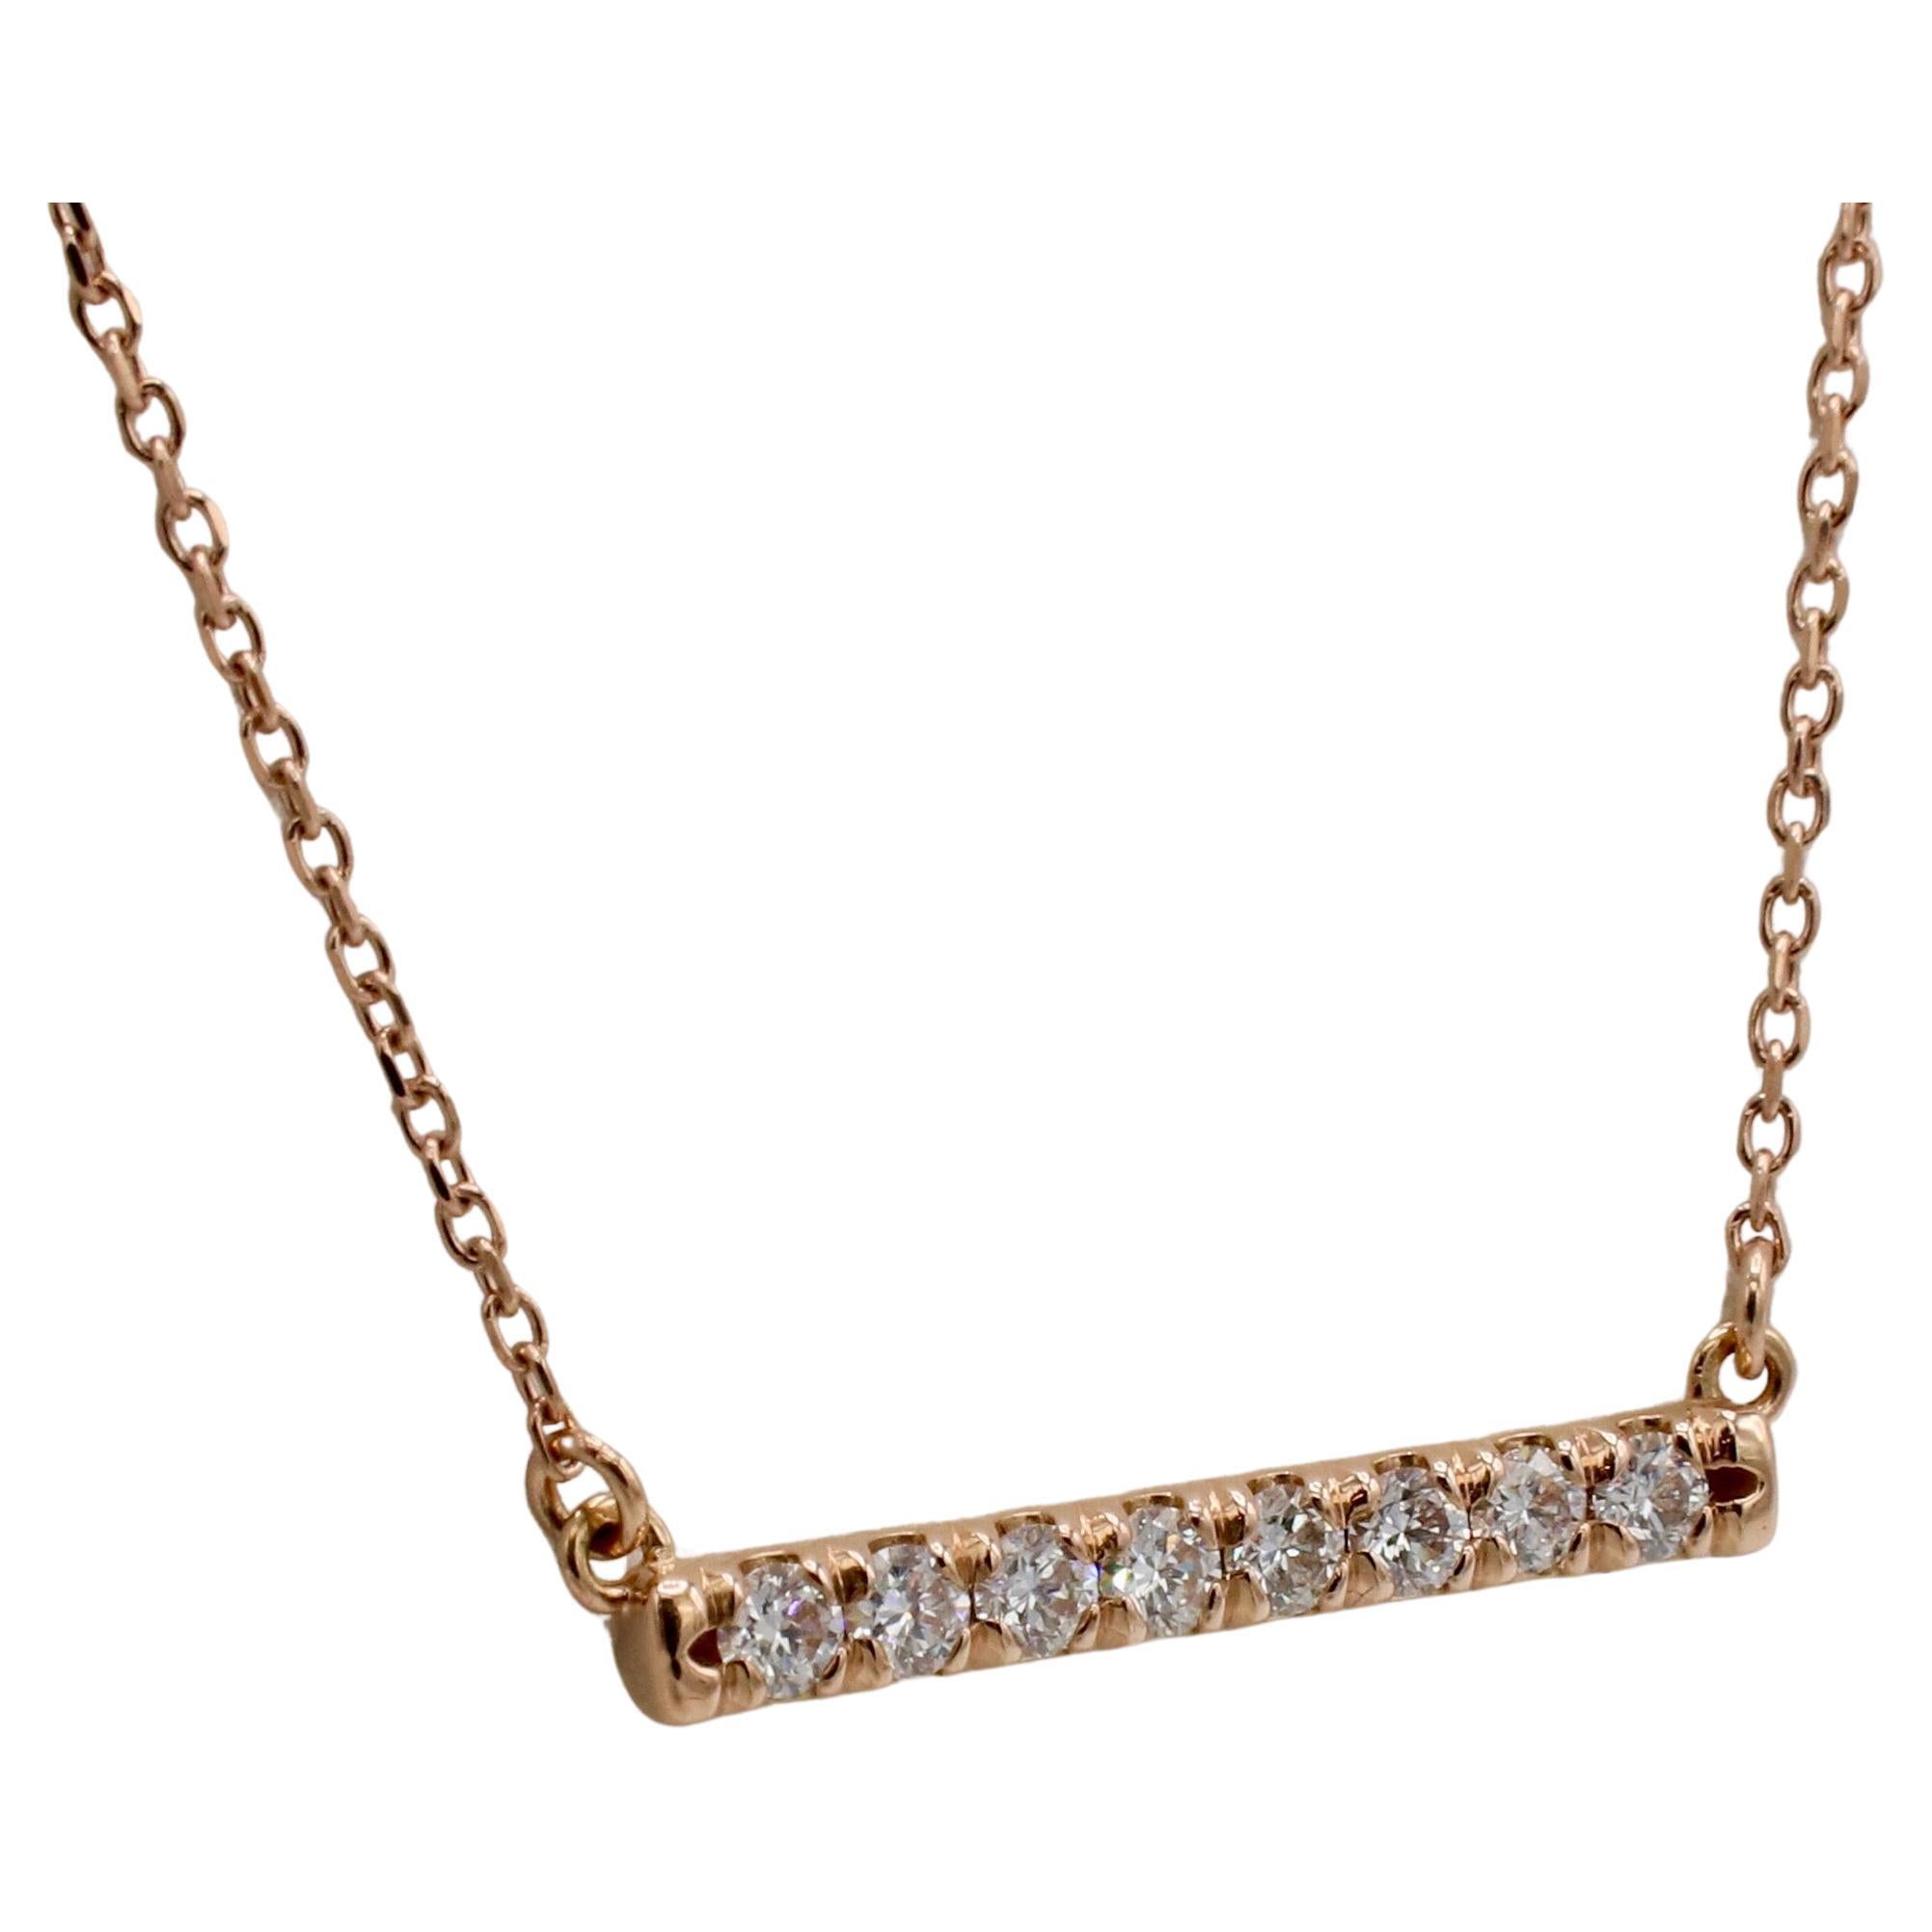 14K Rose Gold .25 Carat Natural Diamond French-Set Bar Necklace
Metal: 14k white gold
Weight: 1.86 grams
Diamonds. 0.25 carats G-H VS round natural diamonds
Bar: 19.5mm
Chain length: 16 inches
Note: Also available in white gold and yellow gold 